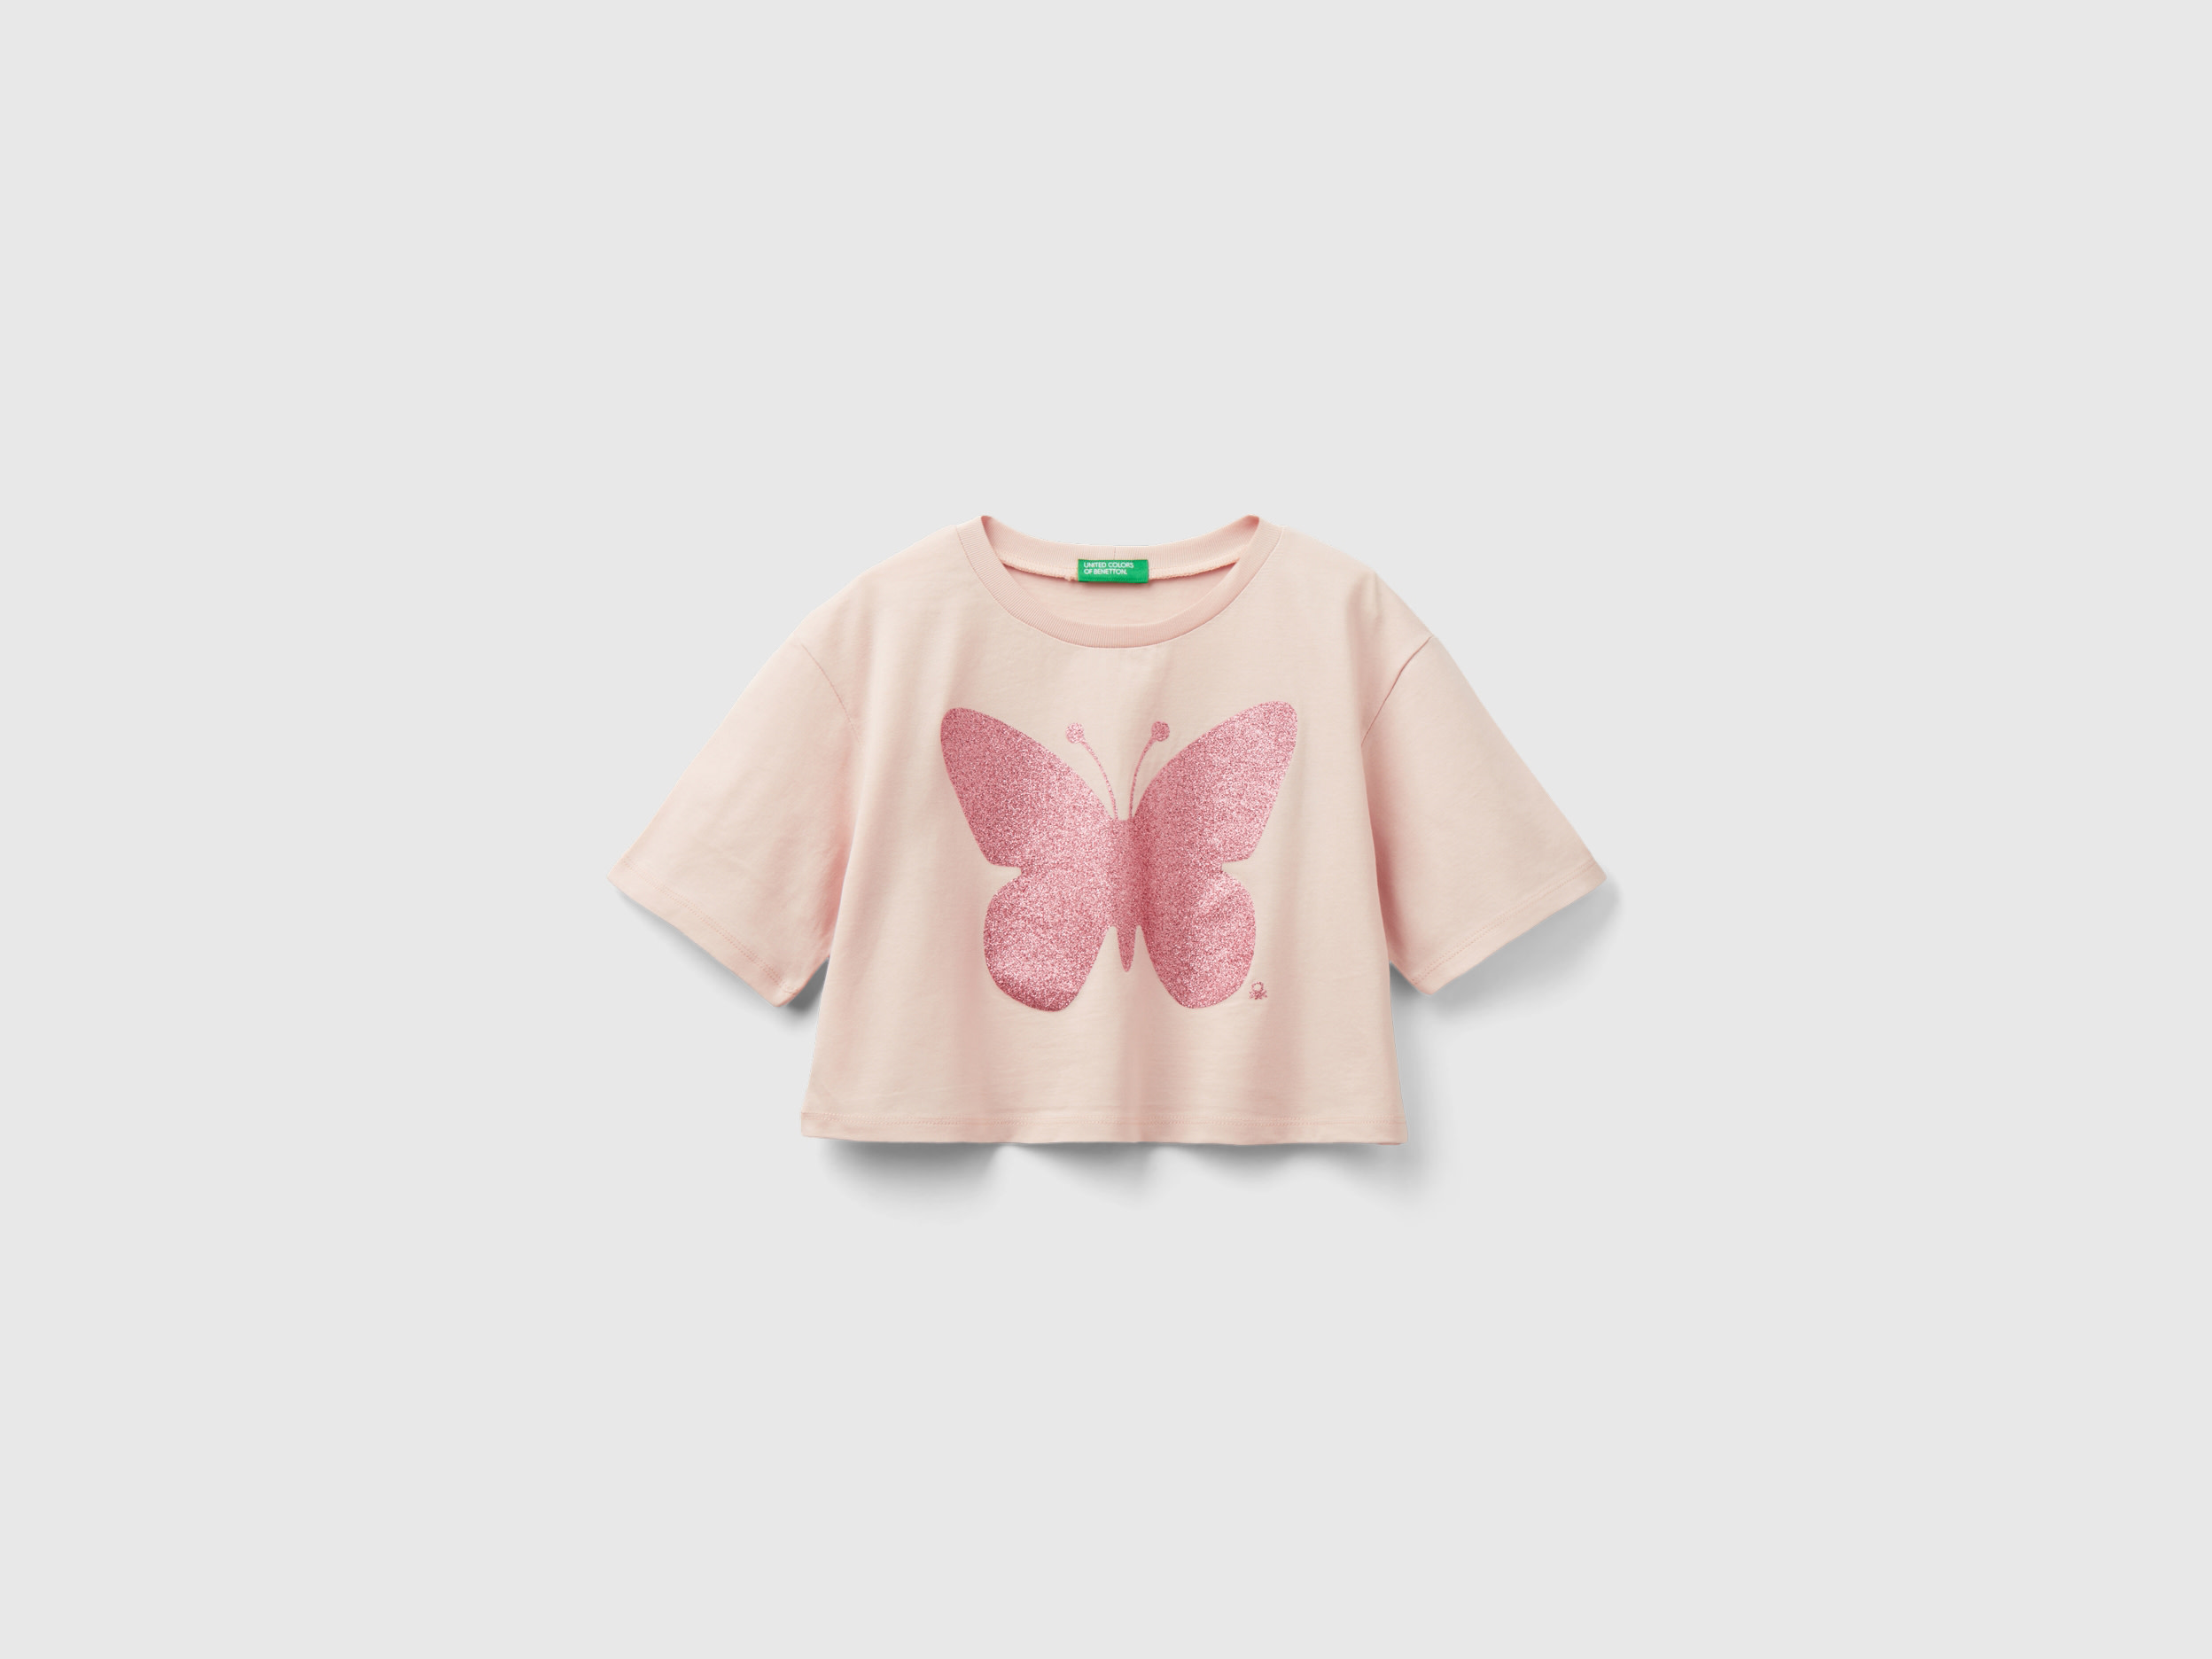 Image of Benetton, T-shirt With Glittery Print, size S, Peach, Kids